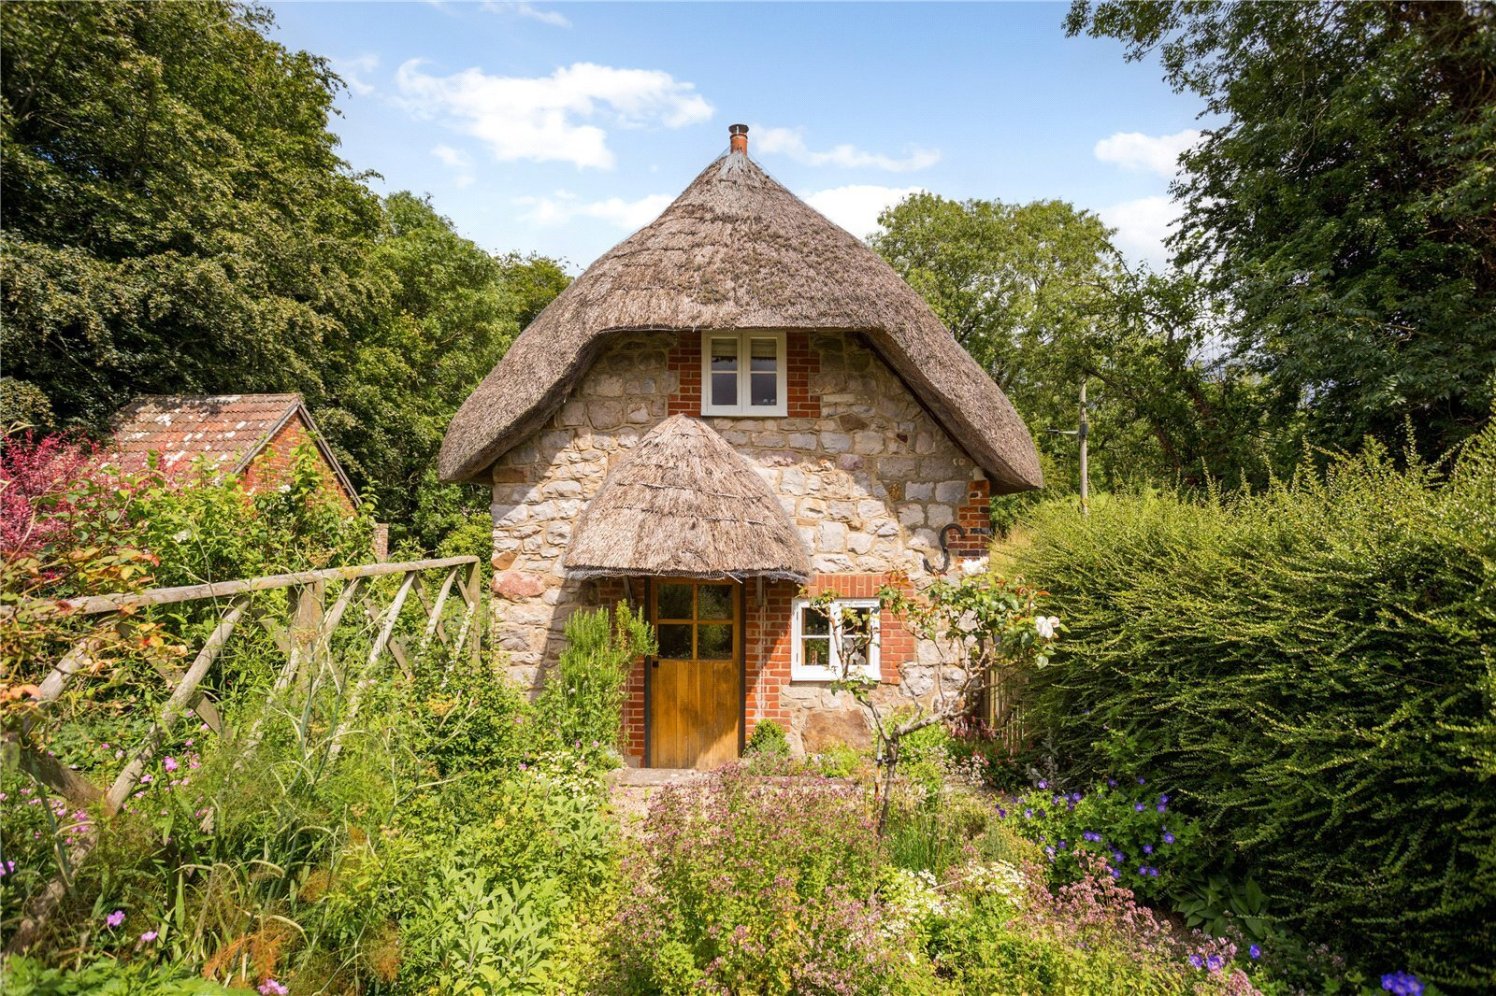 ‘The second cosiest cottage in Britain’ is on the market in Wiltshire